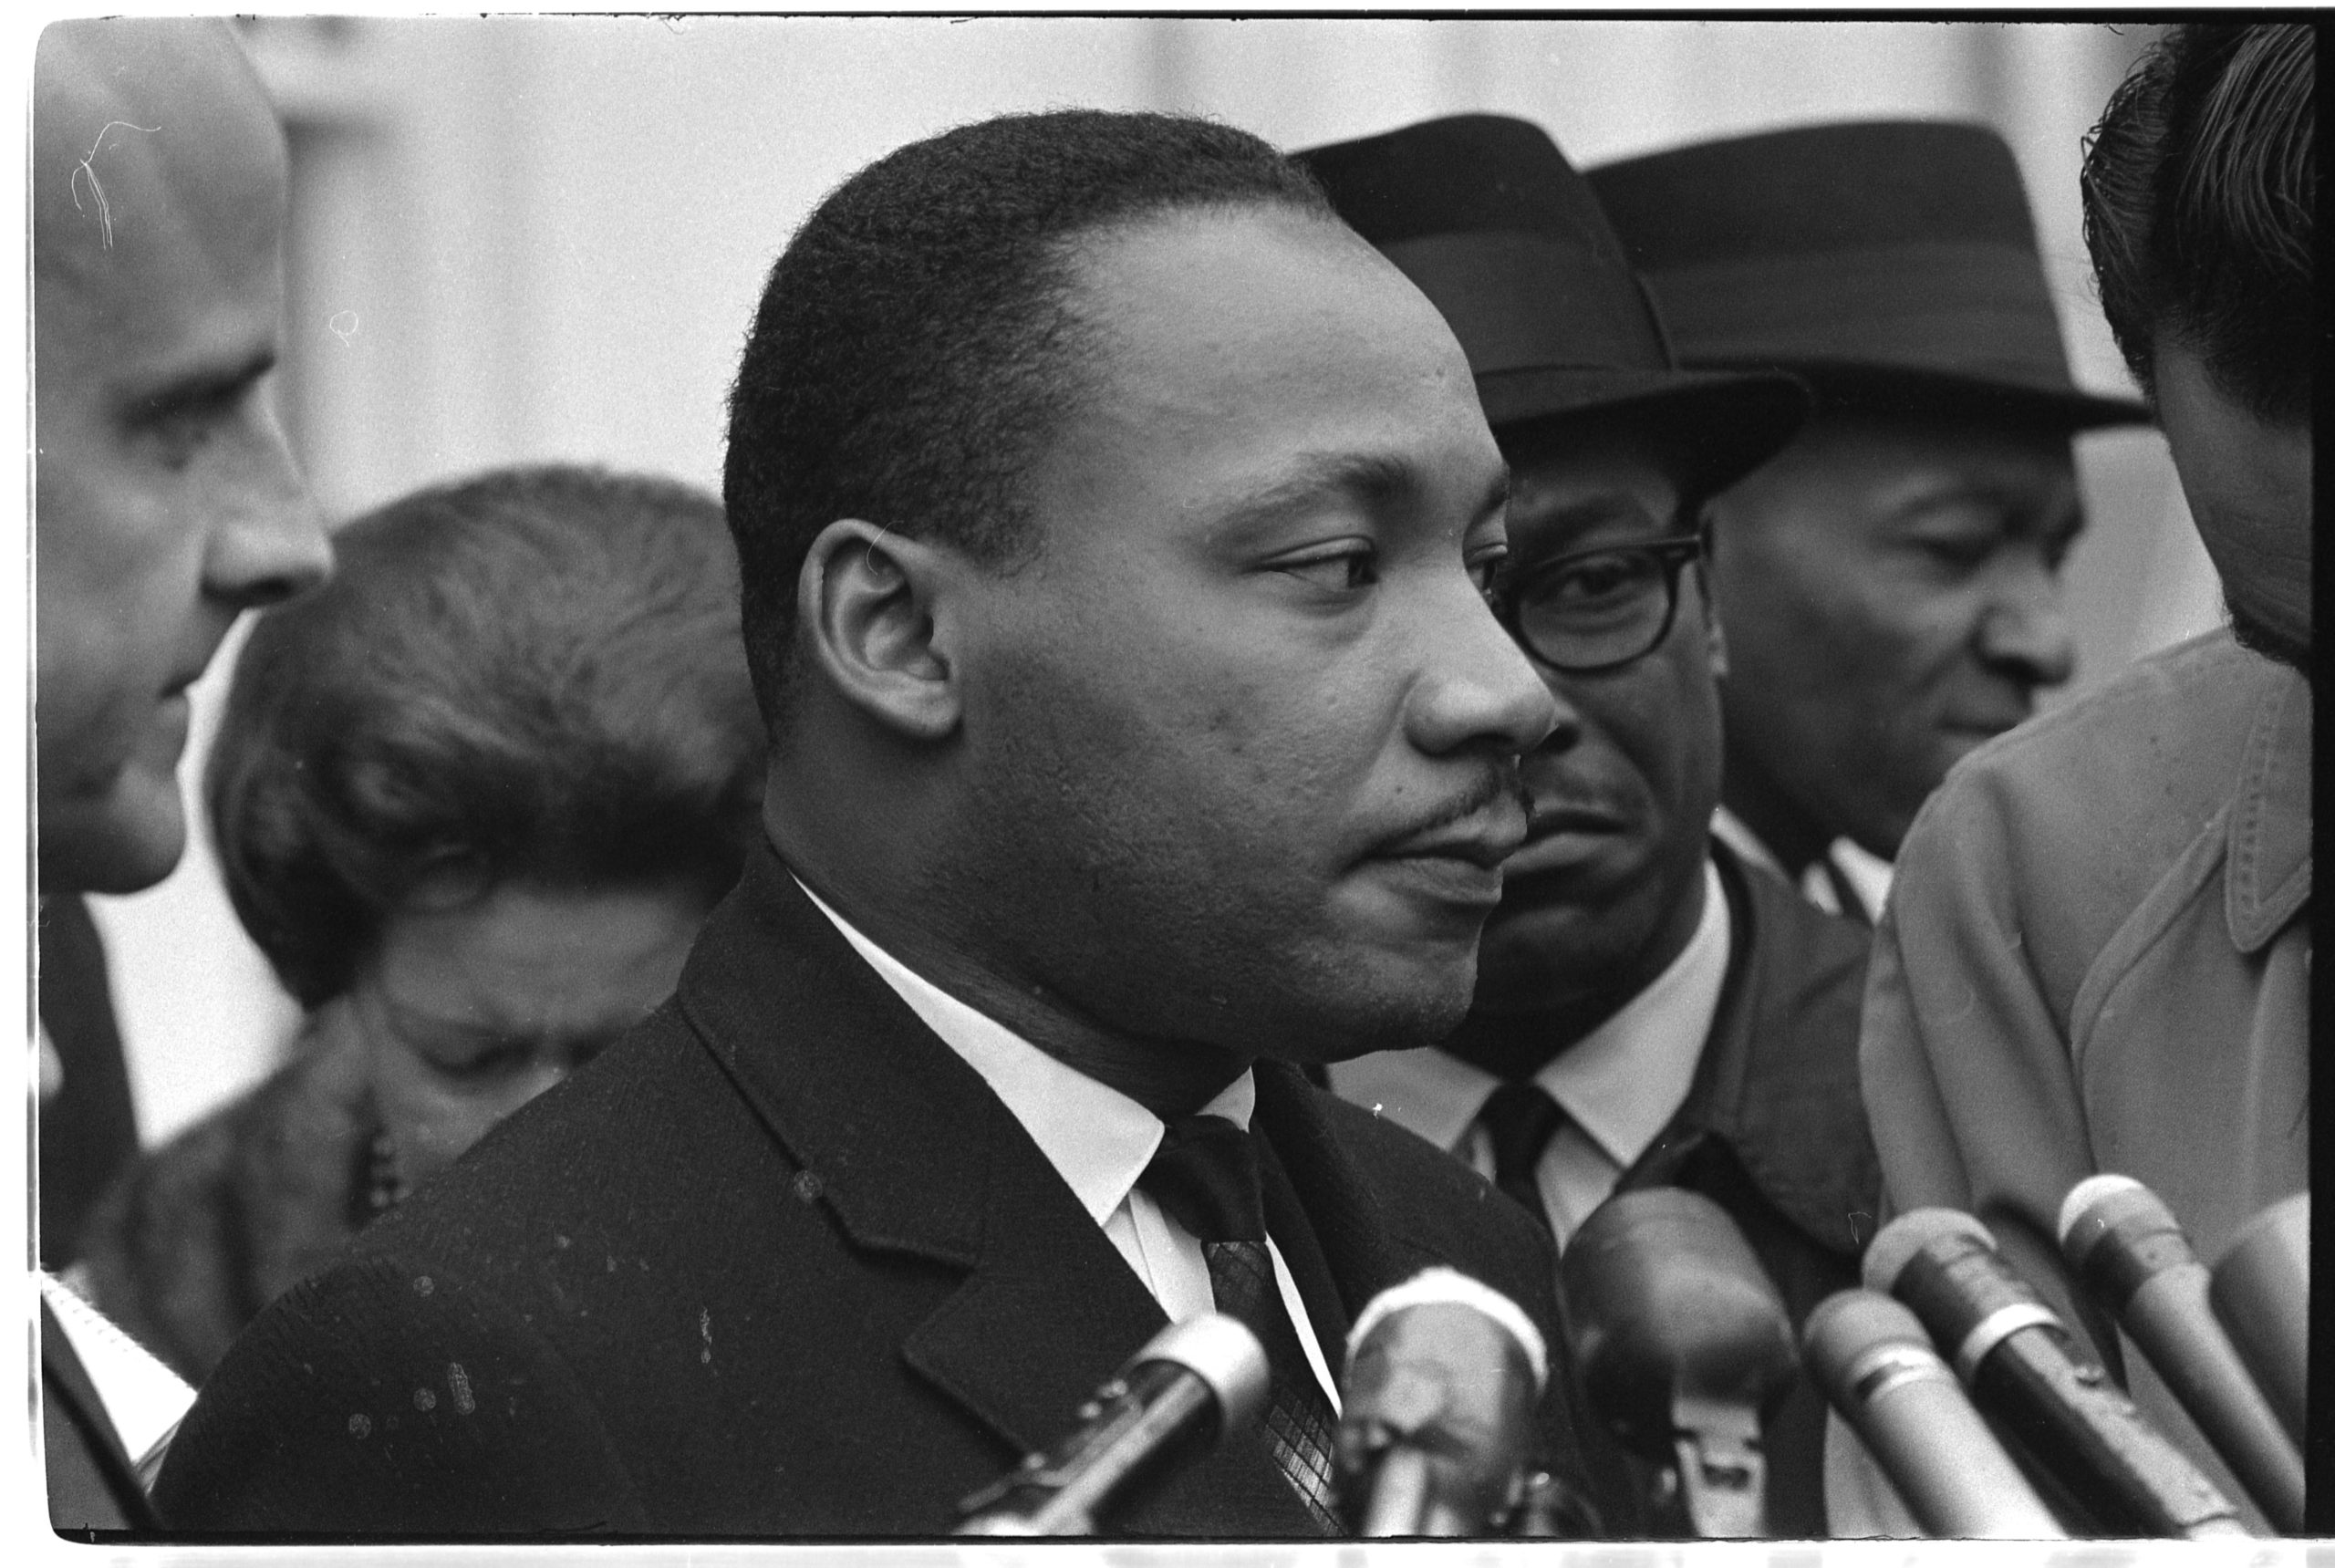 Dr. Martin Luther King Jr. standing at a podium